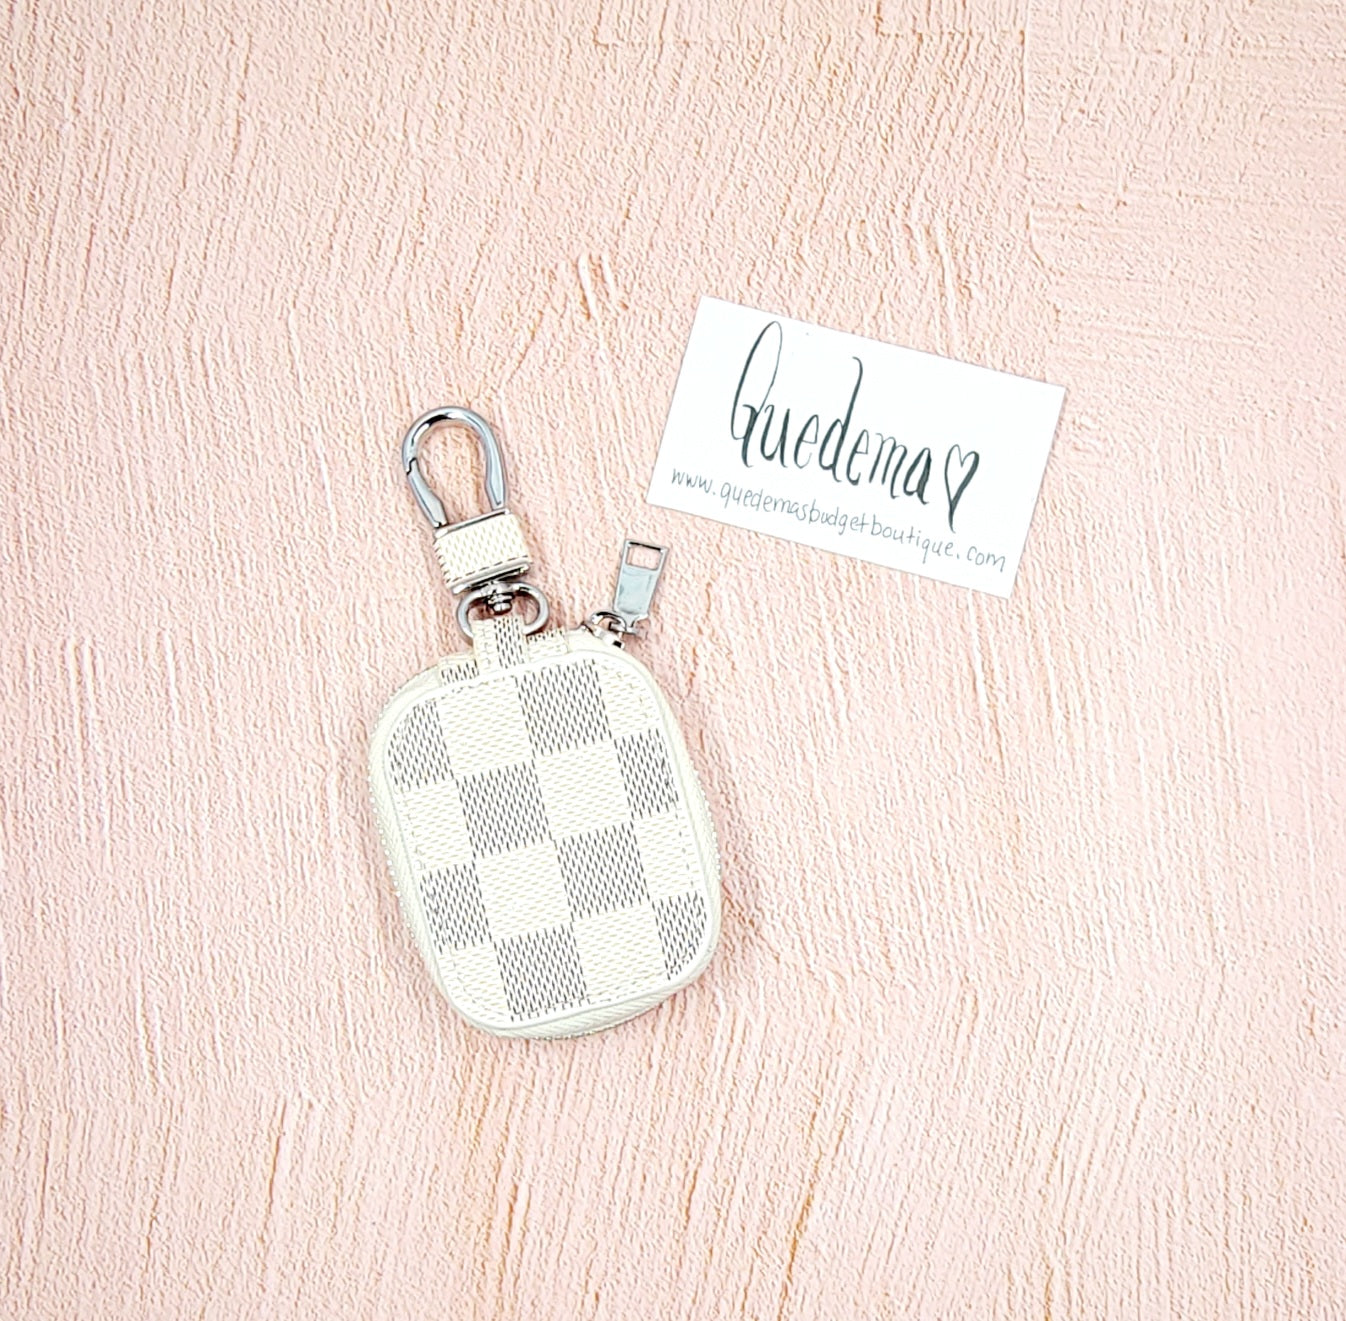 Checkered Keychain! 2 Options Available!